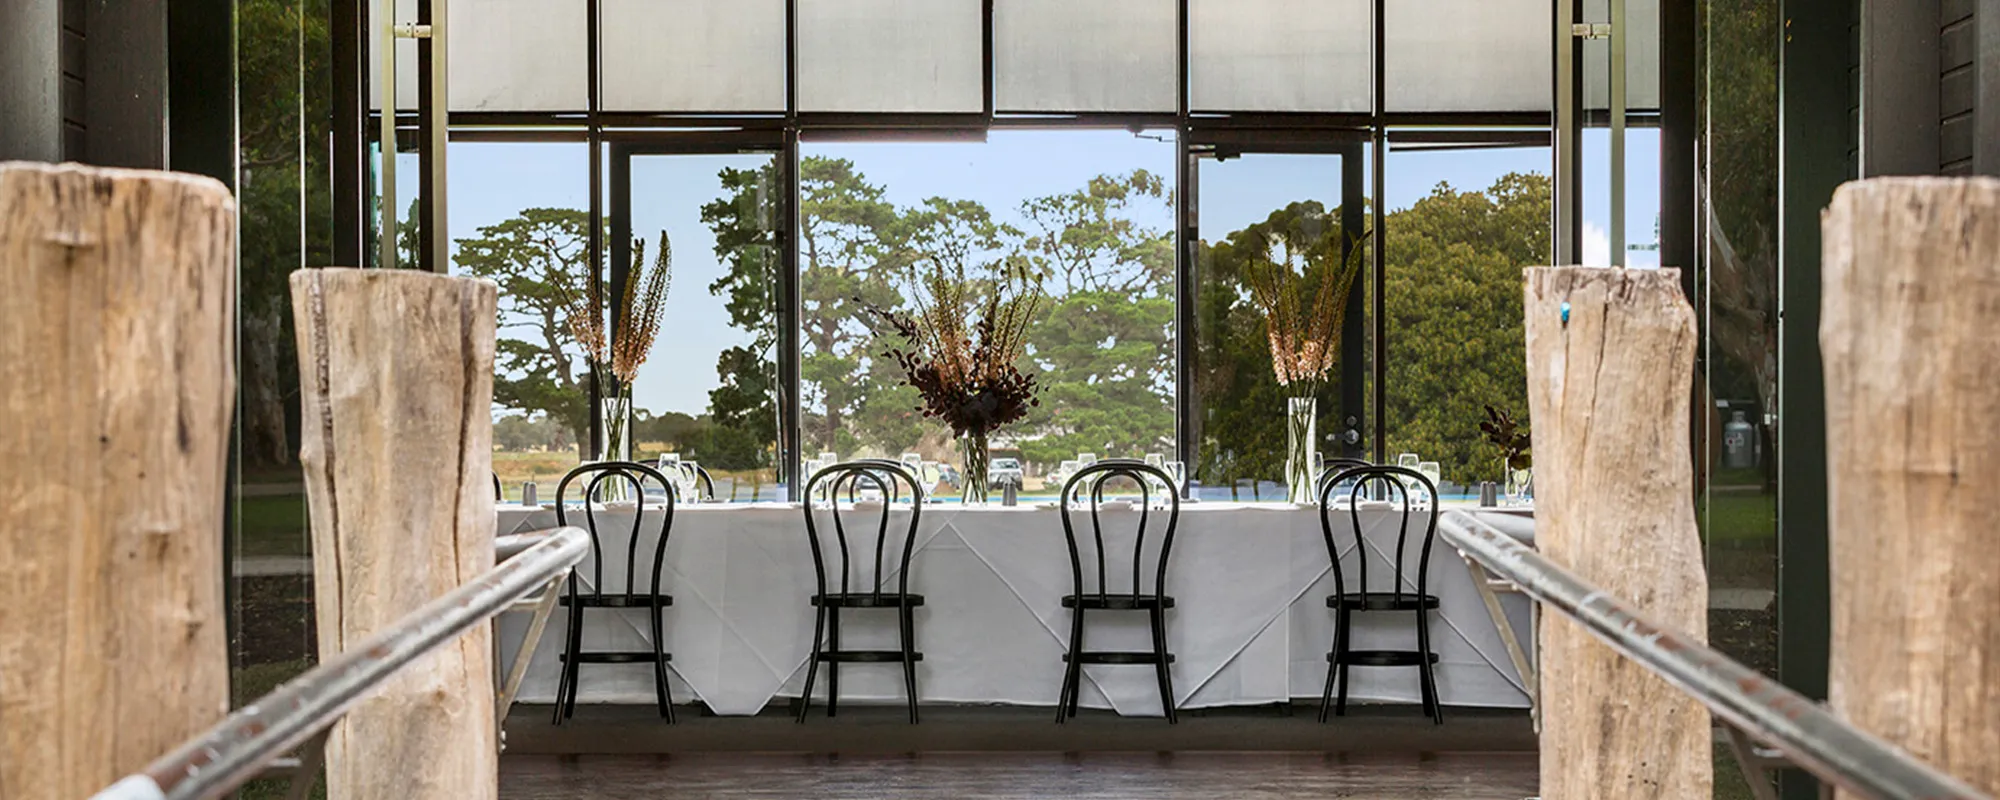 Lancemore Mansion Hotel Werribee Park Conference Venue Regional Event and wedding pavilion 2000x800 4